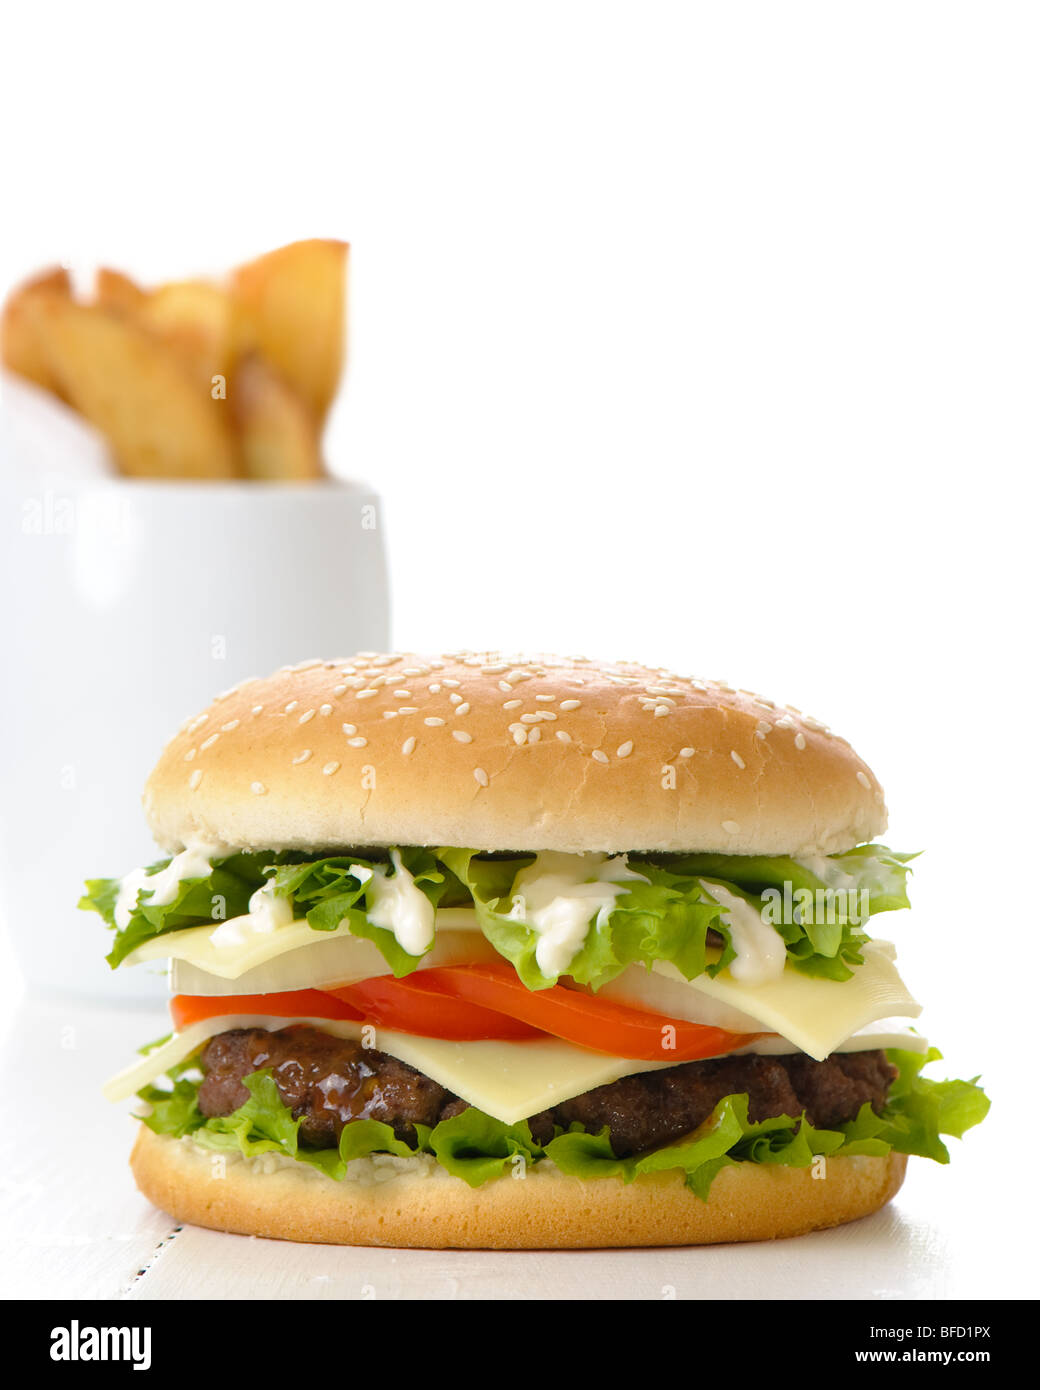 Hamburger with fries in background on white table Stock Photo